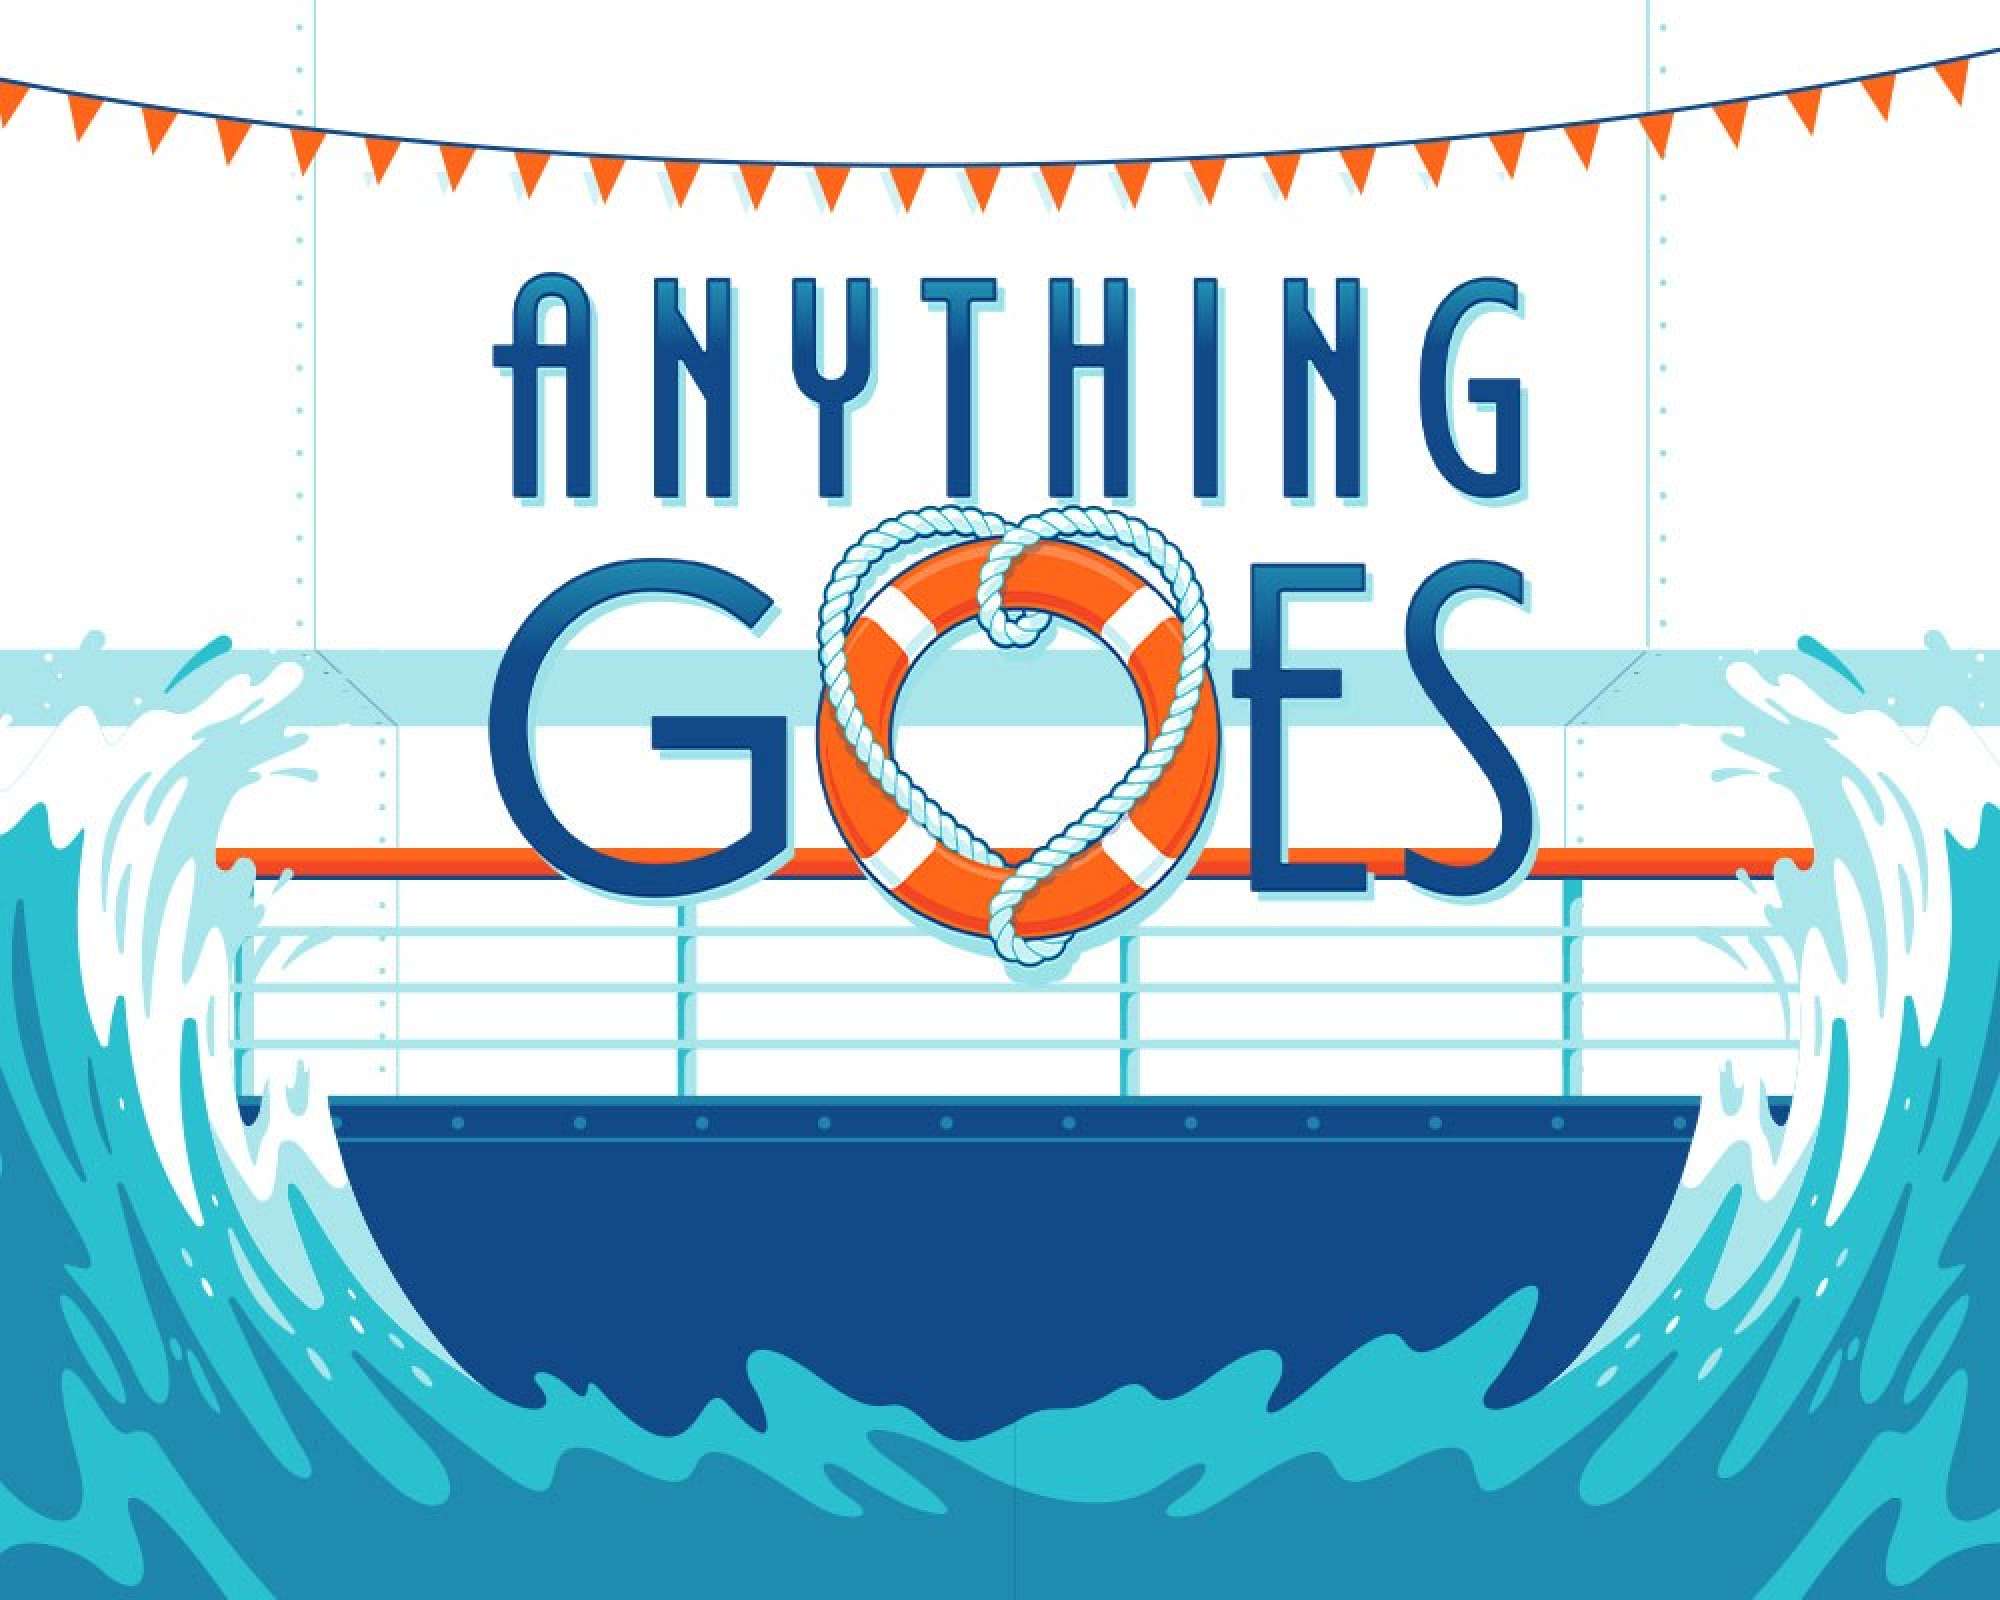 UNW: Anything Goes